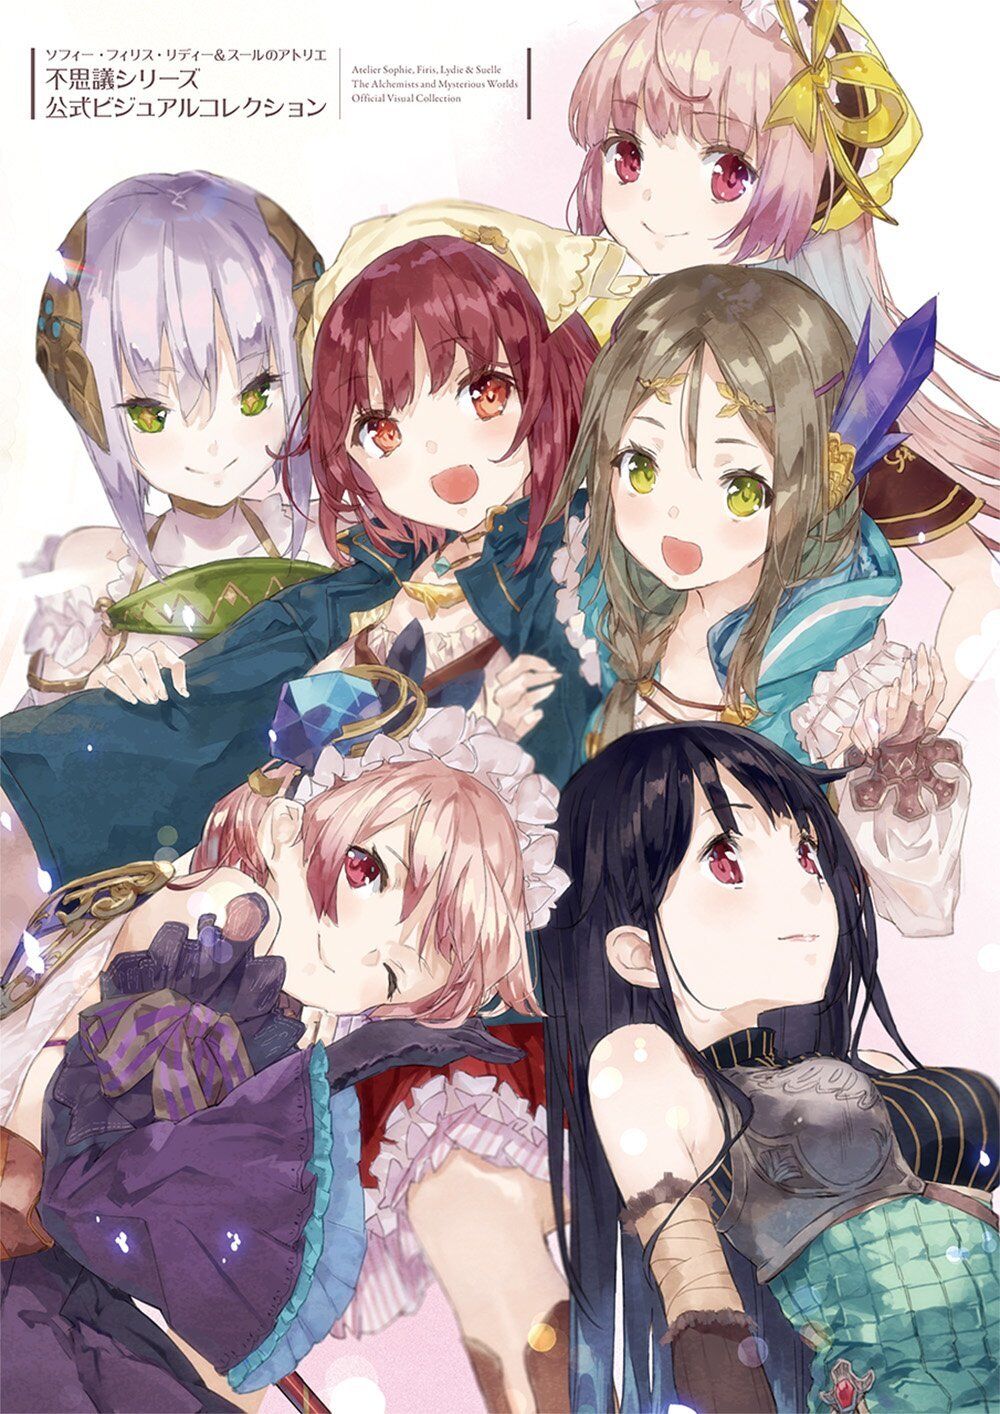 Atelier Sophie,Firis,Lydie & Suelle The Alchemists and Mysterious Worlds Book